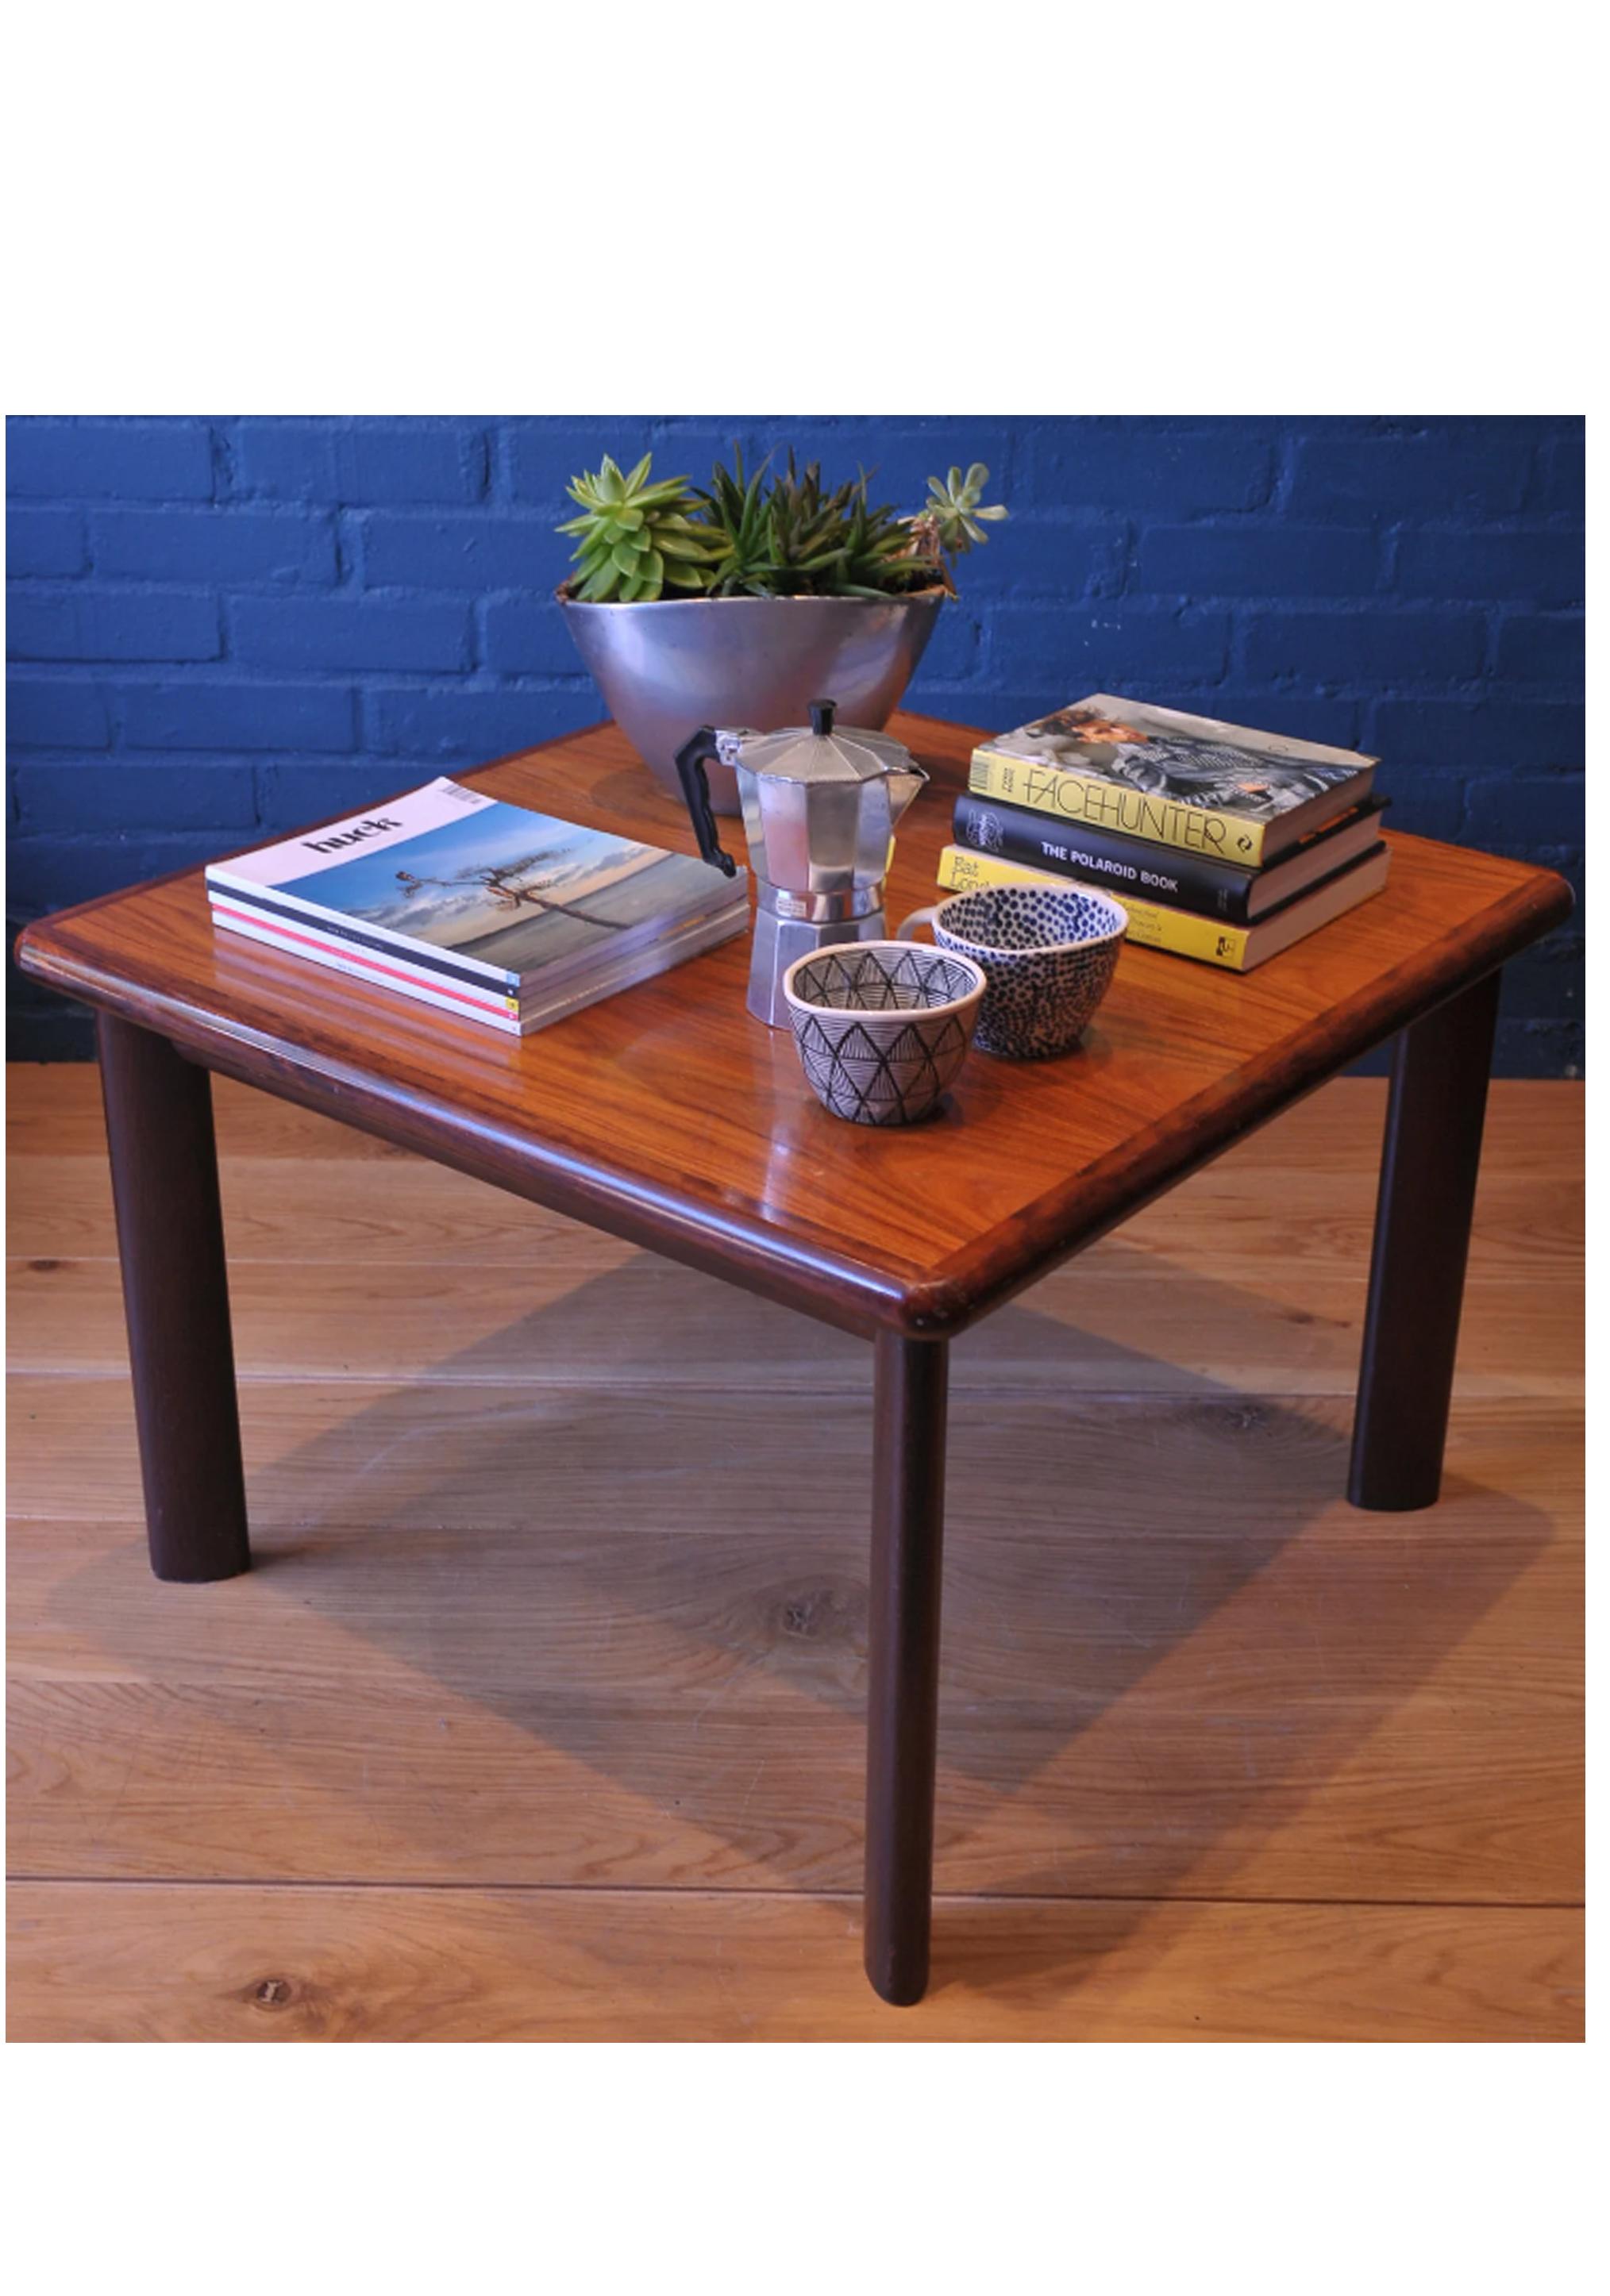 Dyrlund Rosewood & Teak Square Coffee Table Mid Century Made in Denmark 1970s

Rosewood Frame with teak veneered top.

About: Founded in 1960, we at Dyrlund pride ourselves in delivering only the finest quality furniture for high end homes &